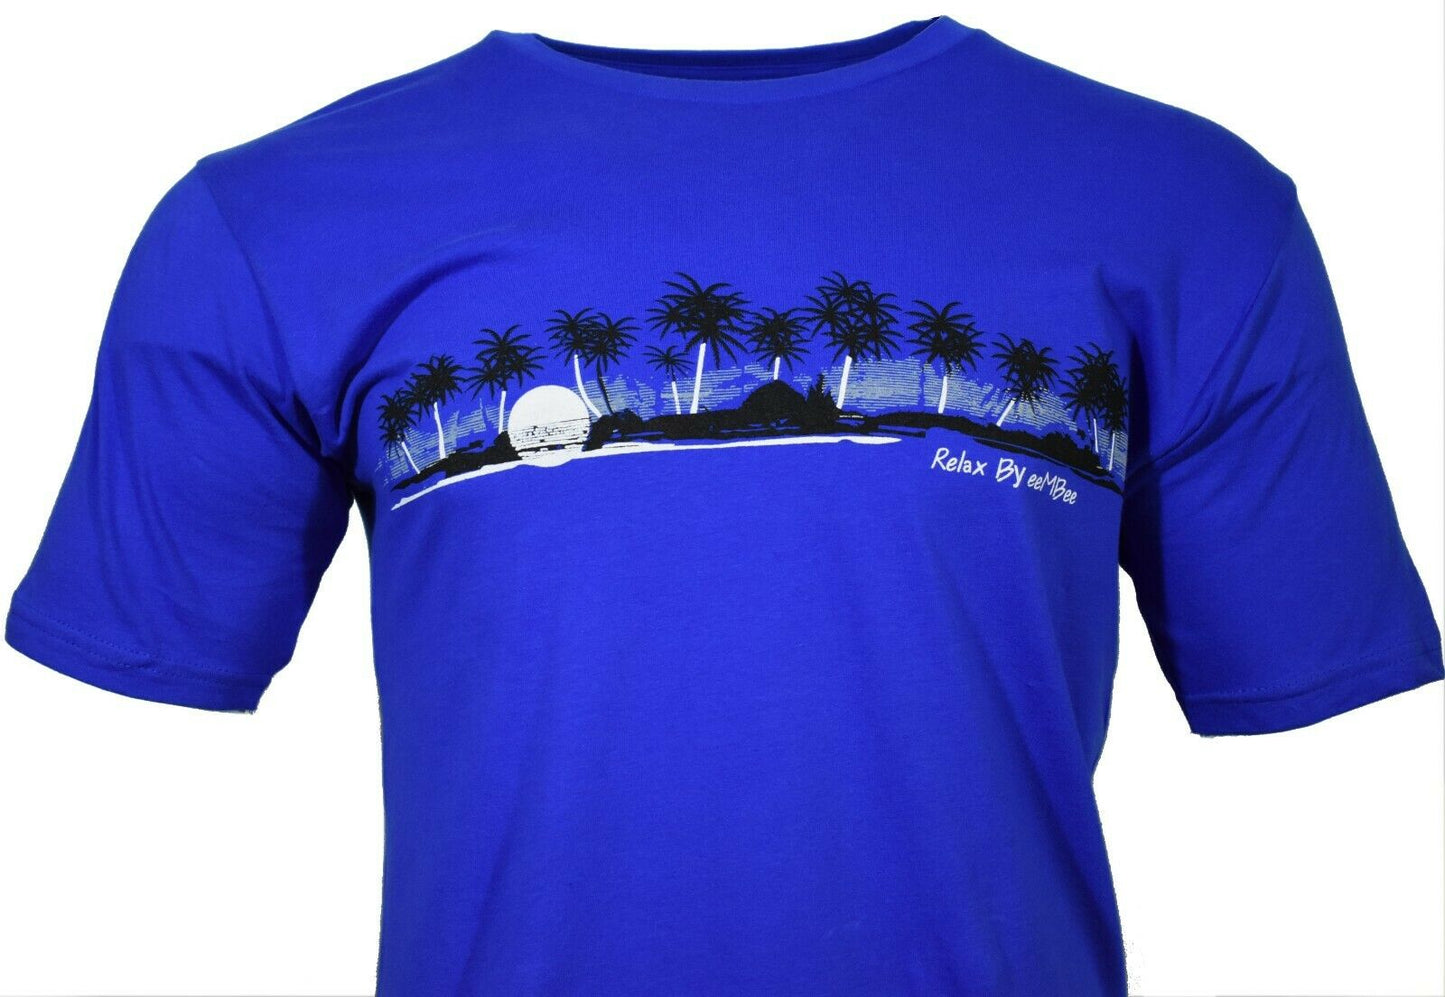 Men's T-Shirt Sunset Palm Trees Royal Blue Relax by MB T shirts 100 % Cotton NEW